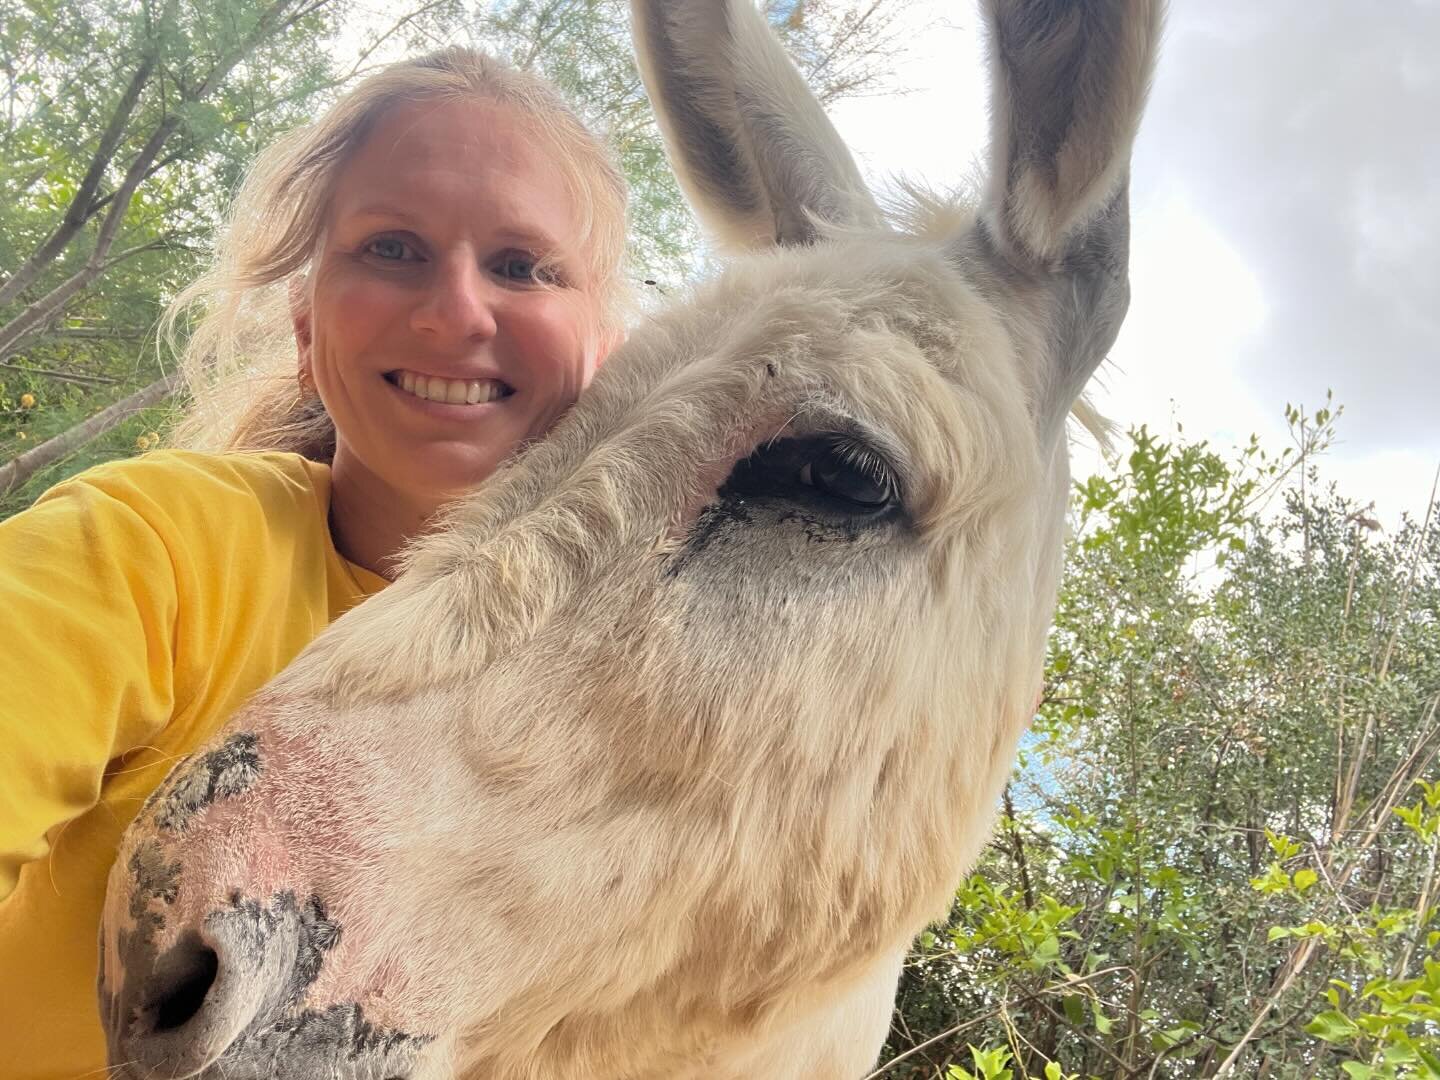 Not shown my face on the grid for a while, Hiiiiii to all the new followers to my page.

Fun fact about me:

Forever being photobombed by Donkey&rsquo;s. 

Photos of me and my favs (Barry, Steve &amp; Ronnie) from my time spent volunteering in Spain 